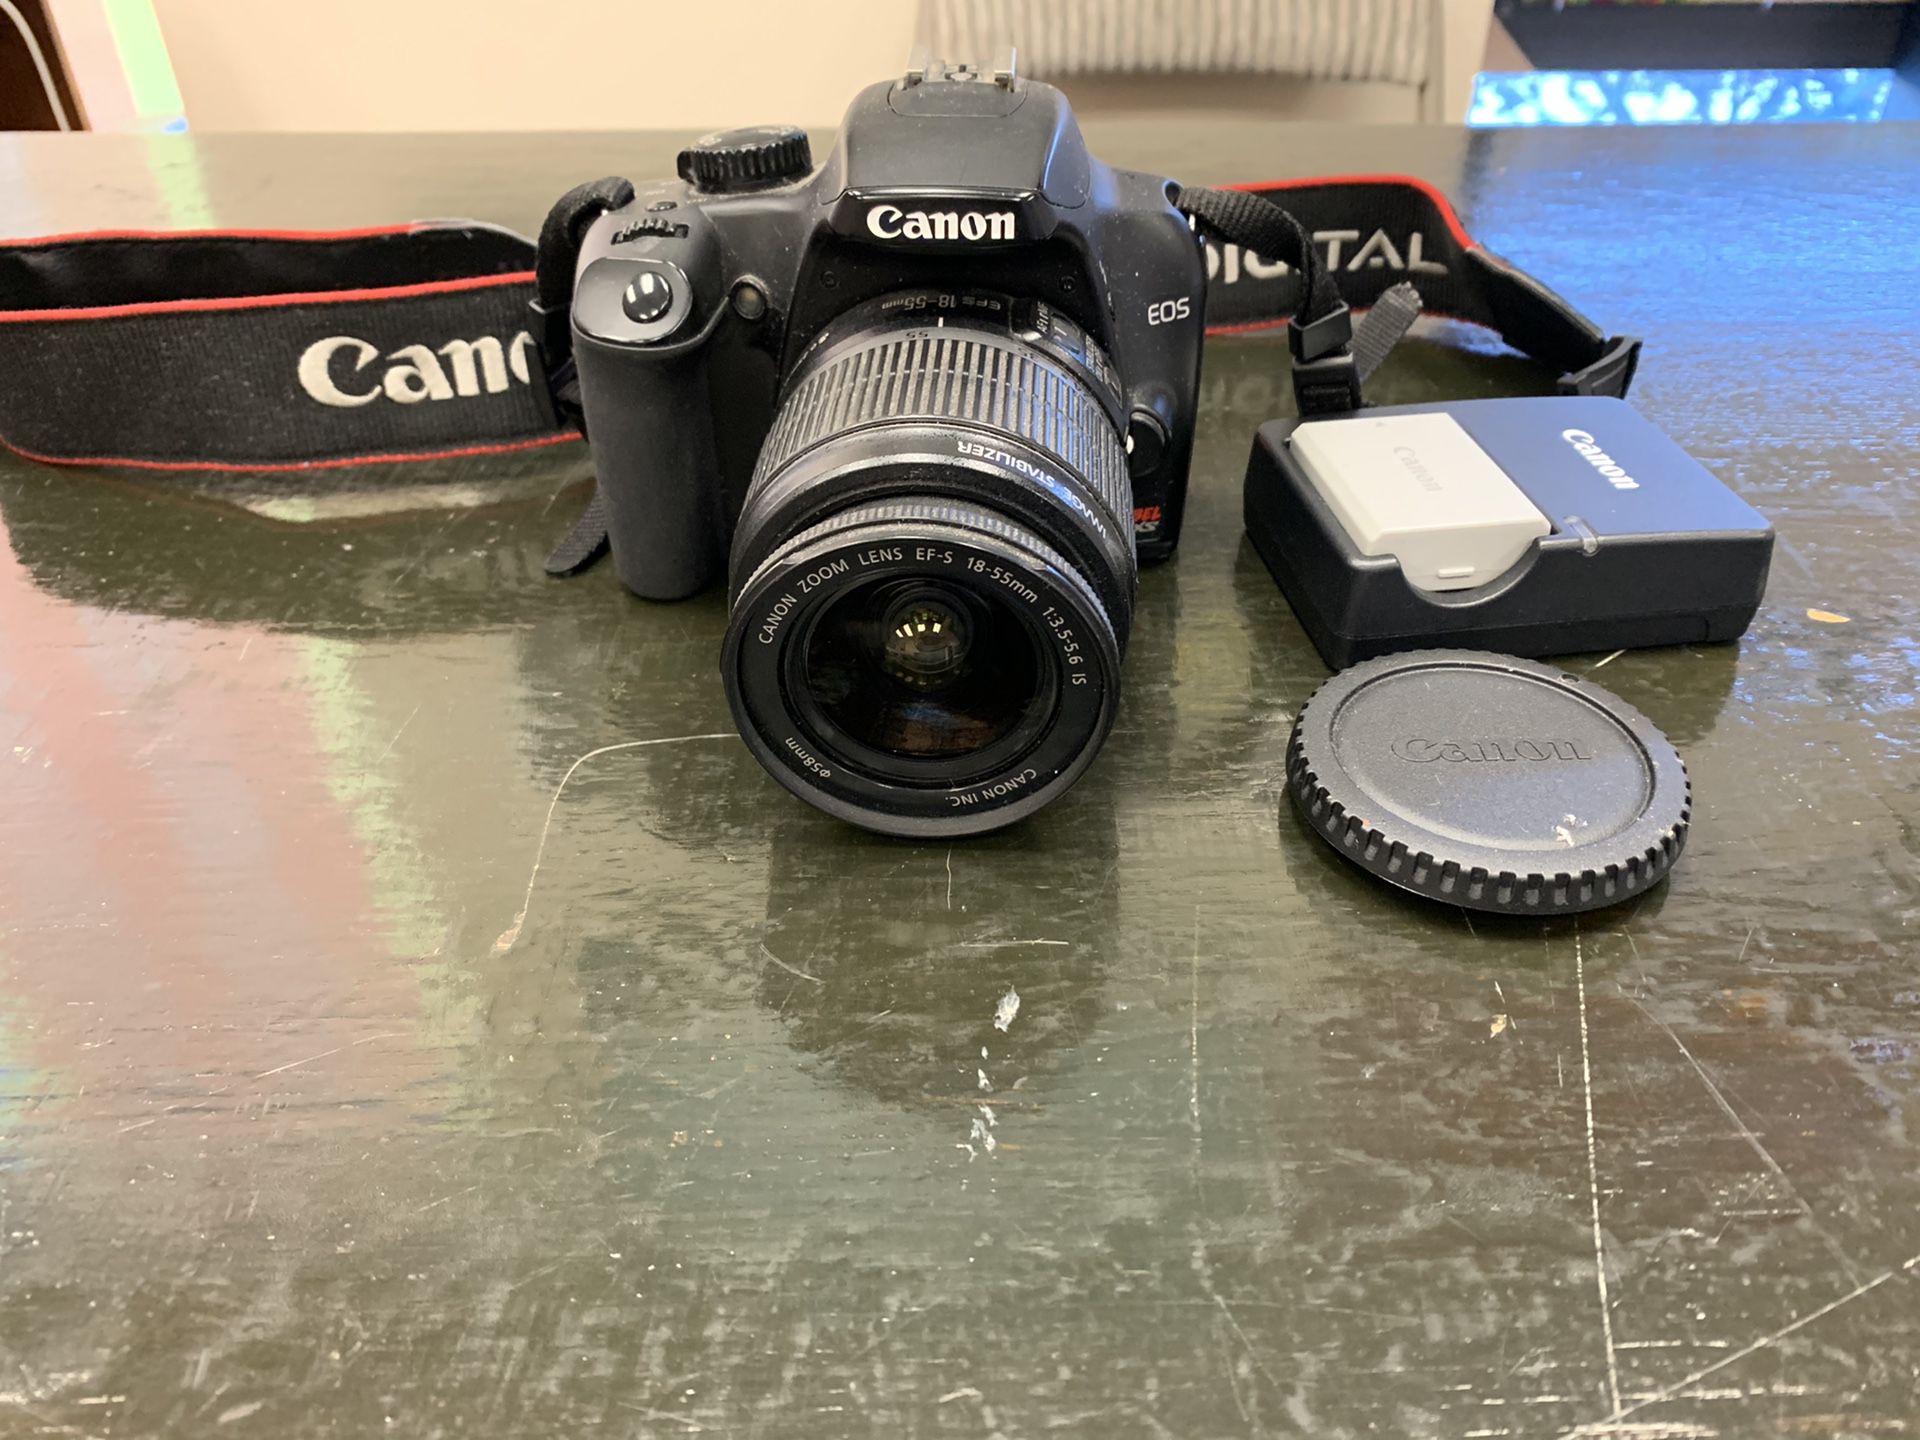 Professional Canon DSLR camera with lens and charger. Model rebel XS